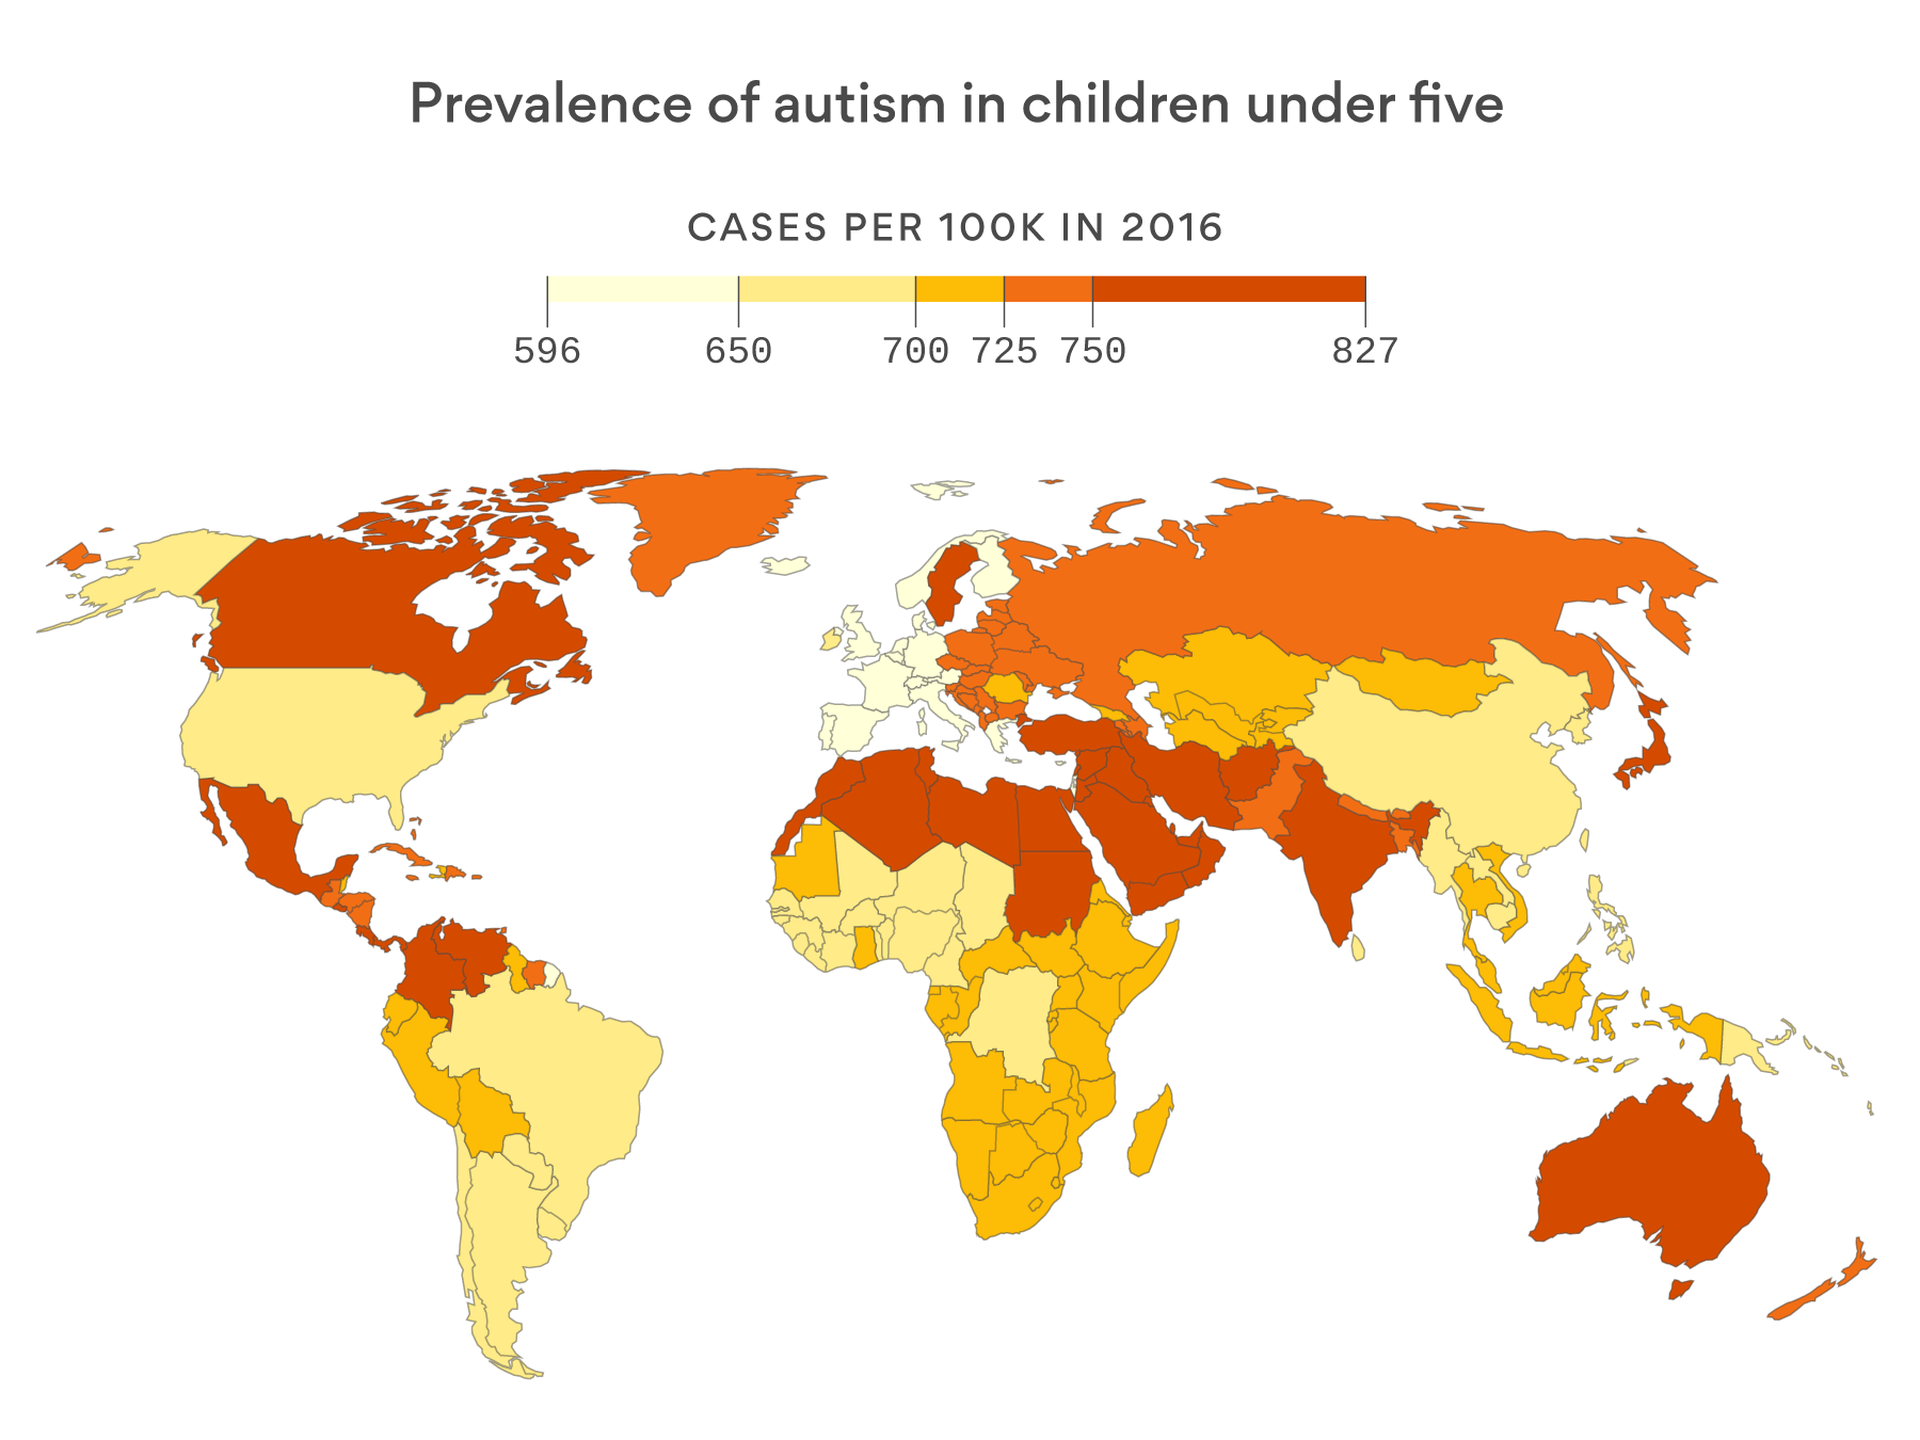 What countries have the highest rate of autism?